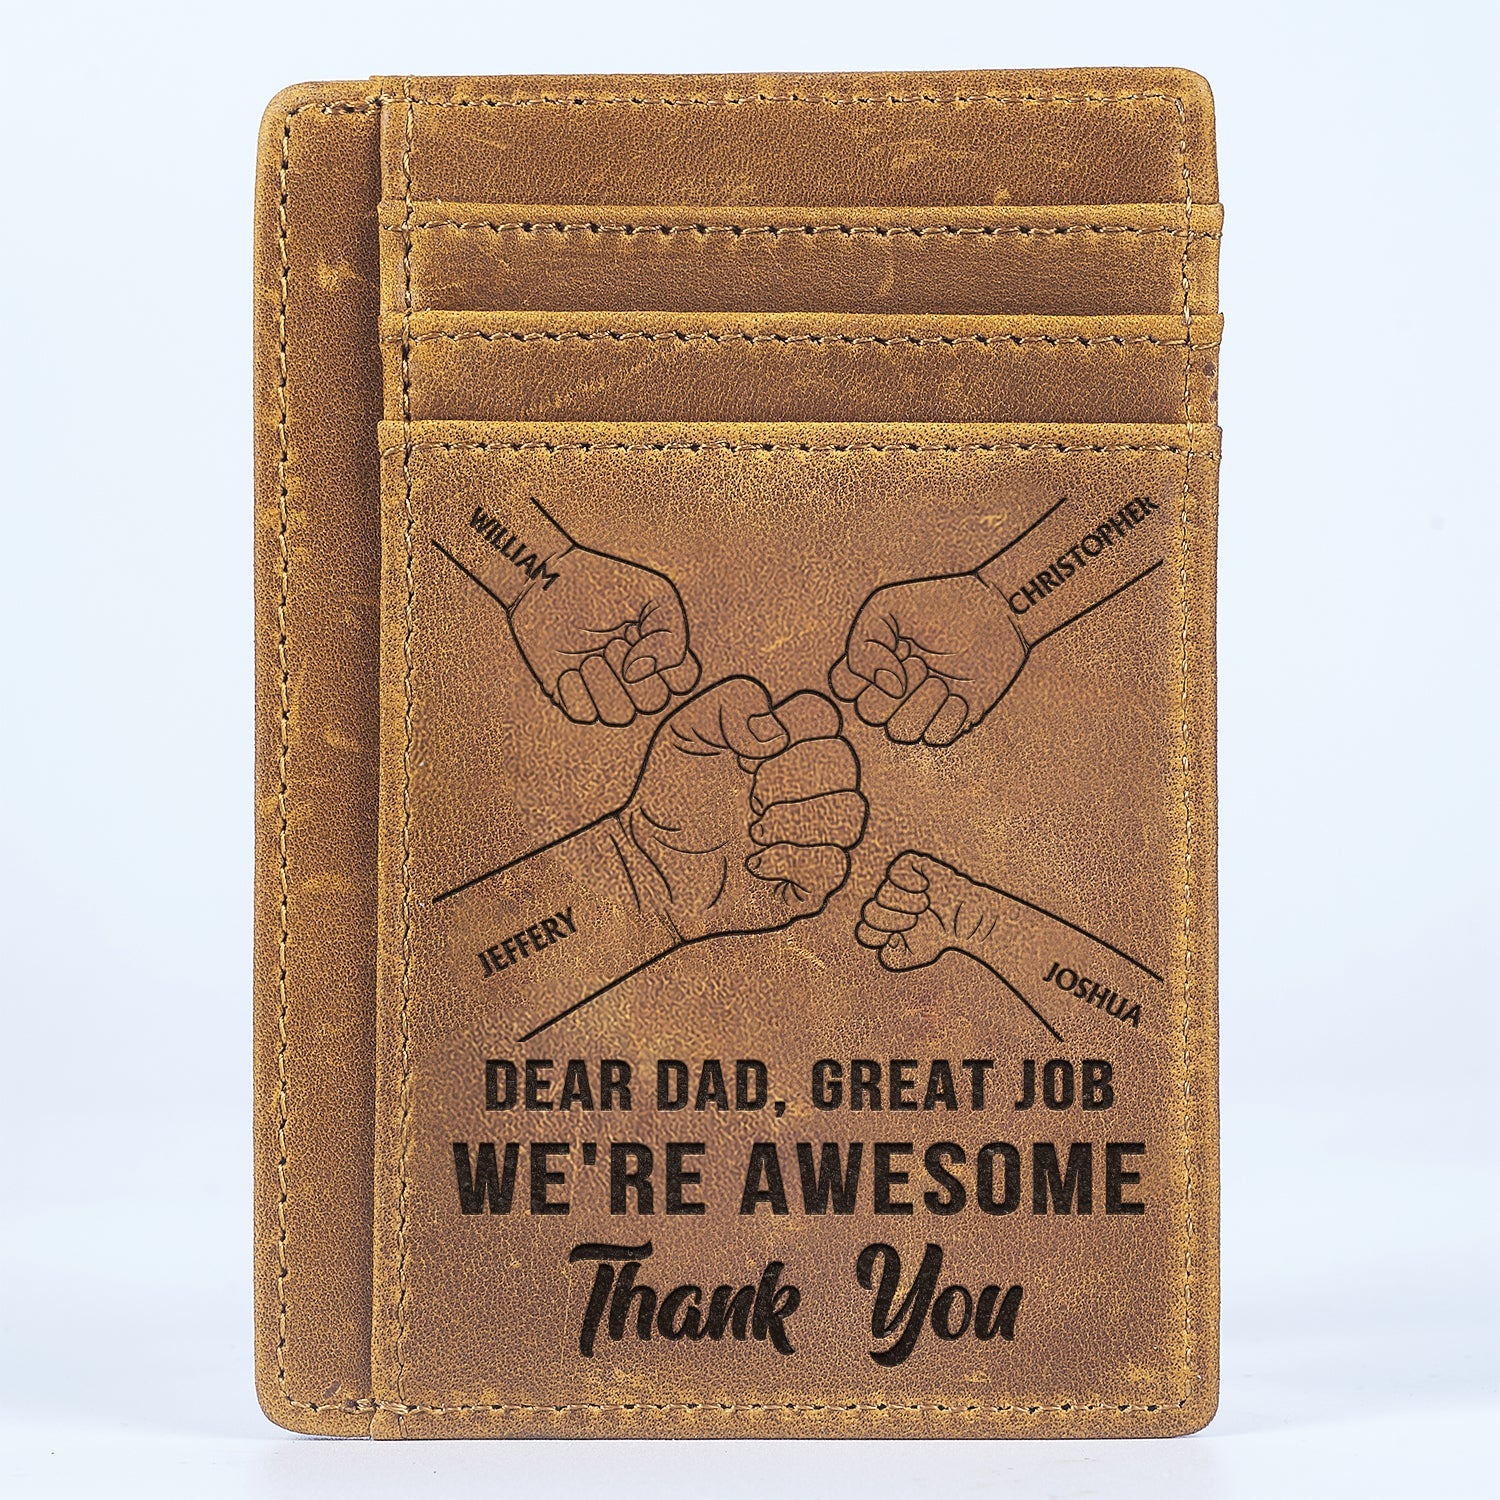 Dear Dad Great Job We're Awesome Thank You - Gift For Dad, Father, Grandpa - Personalized Card Wallet